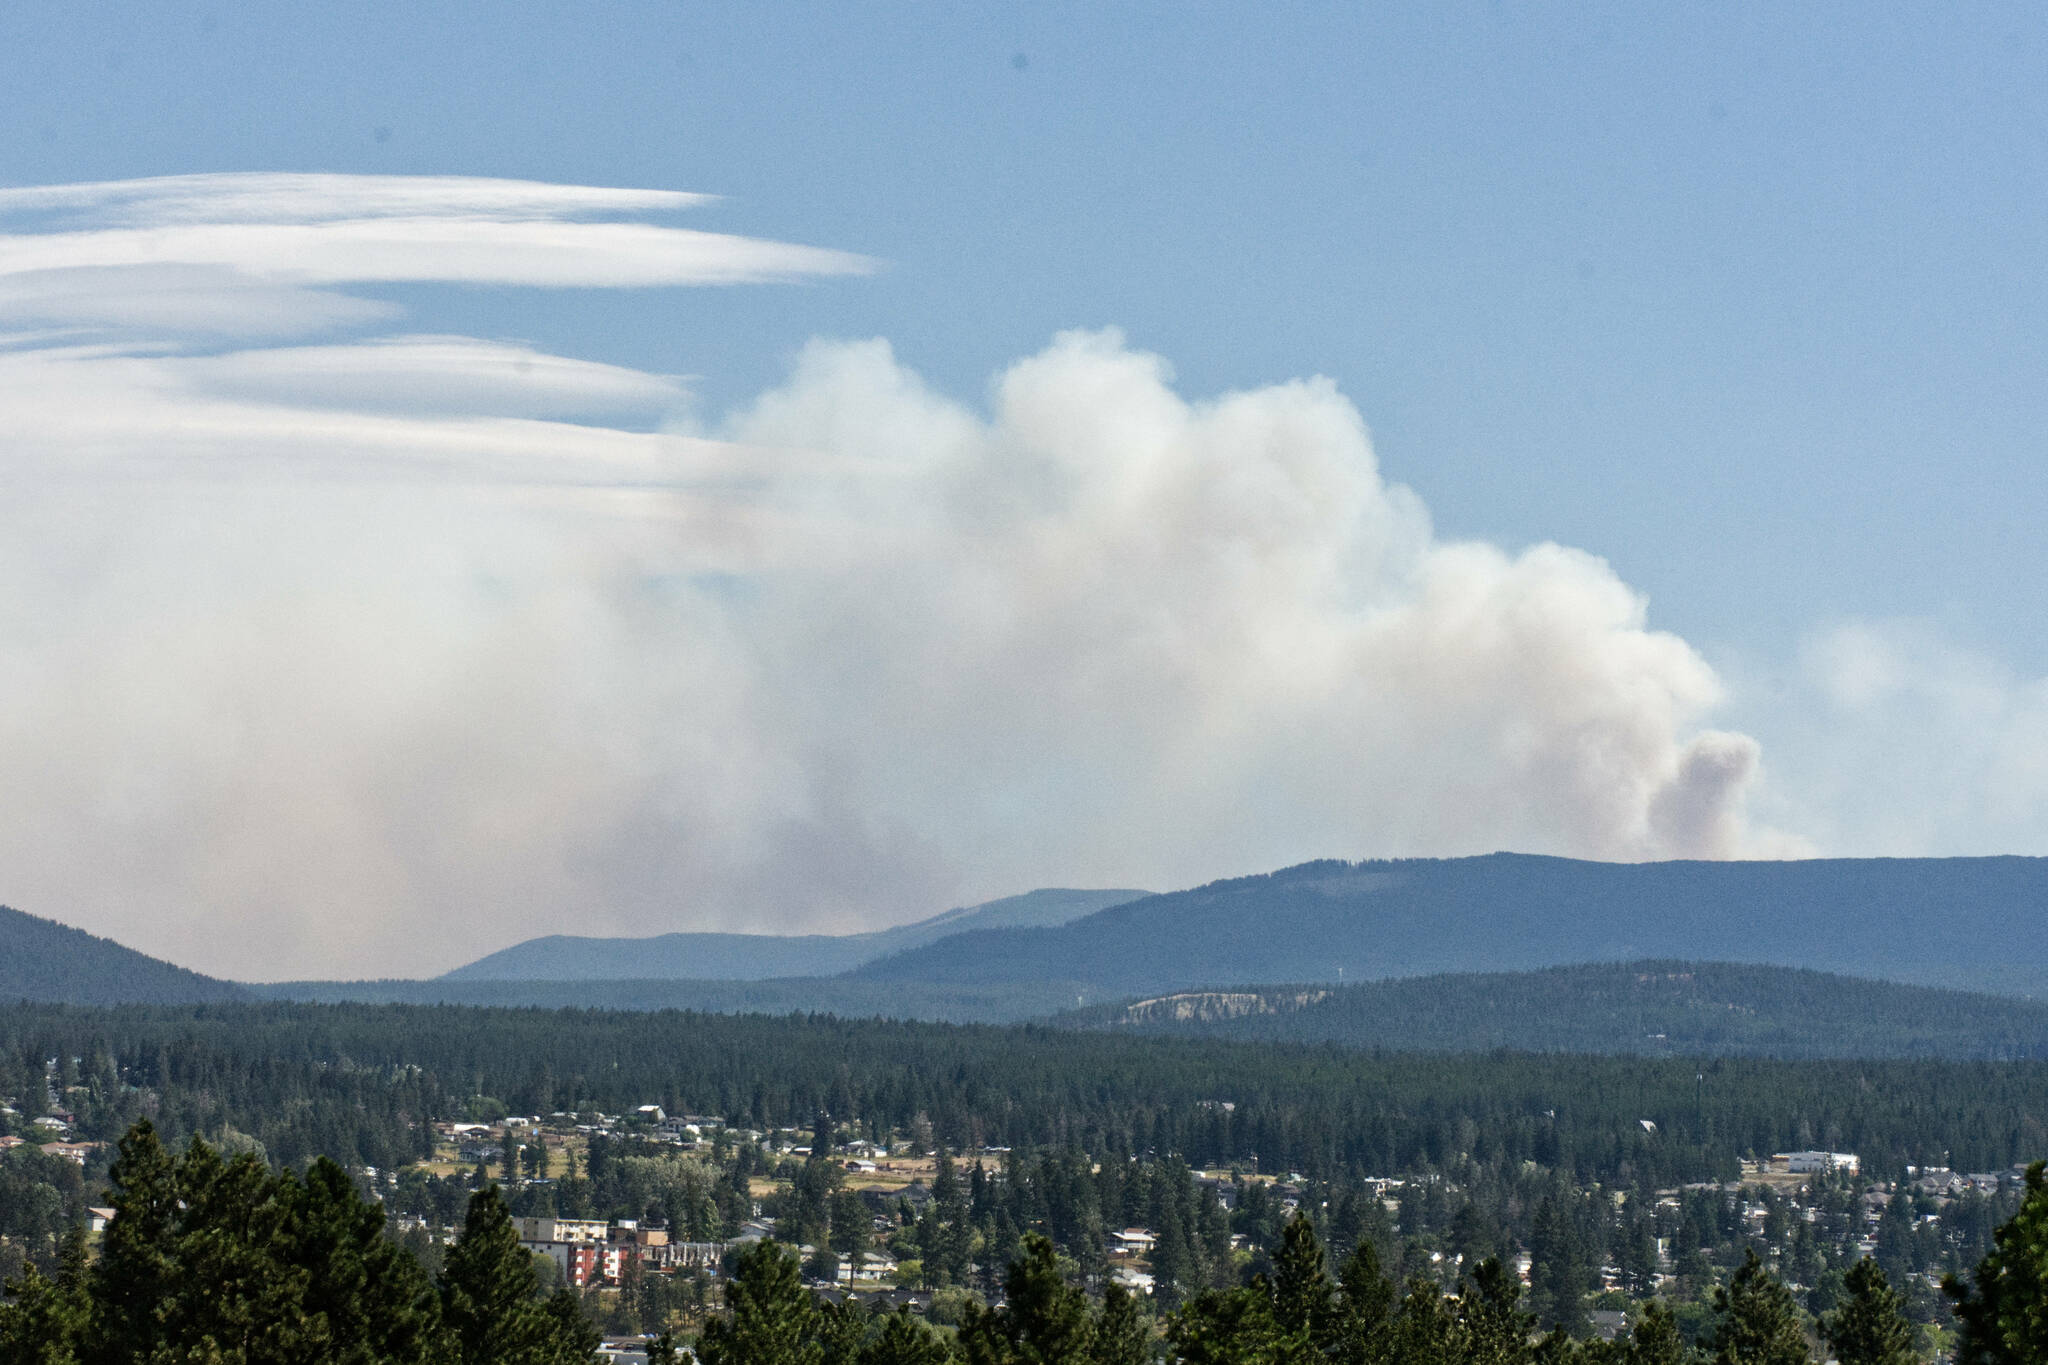 The Connell Ridge wildfire south of Cranbrook is estimated at 500 hectares, as of Wednesday afternoon. Trevor Crawley photo.